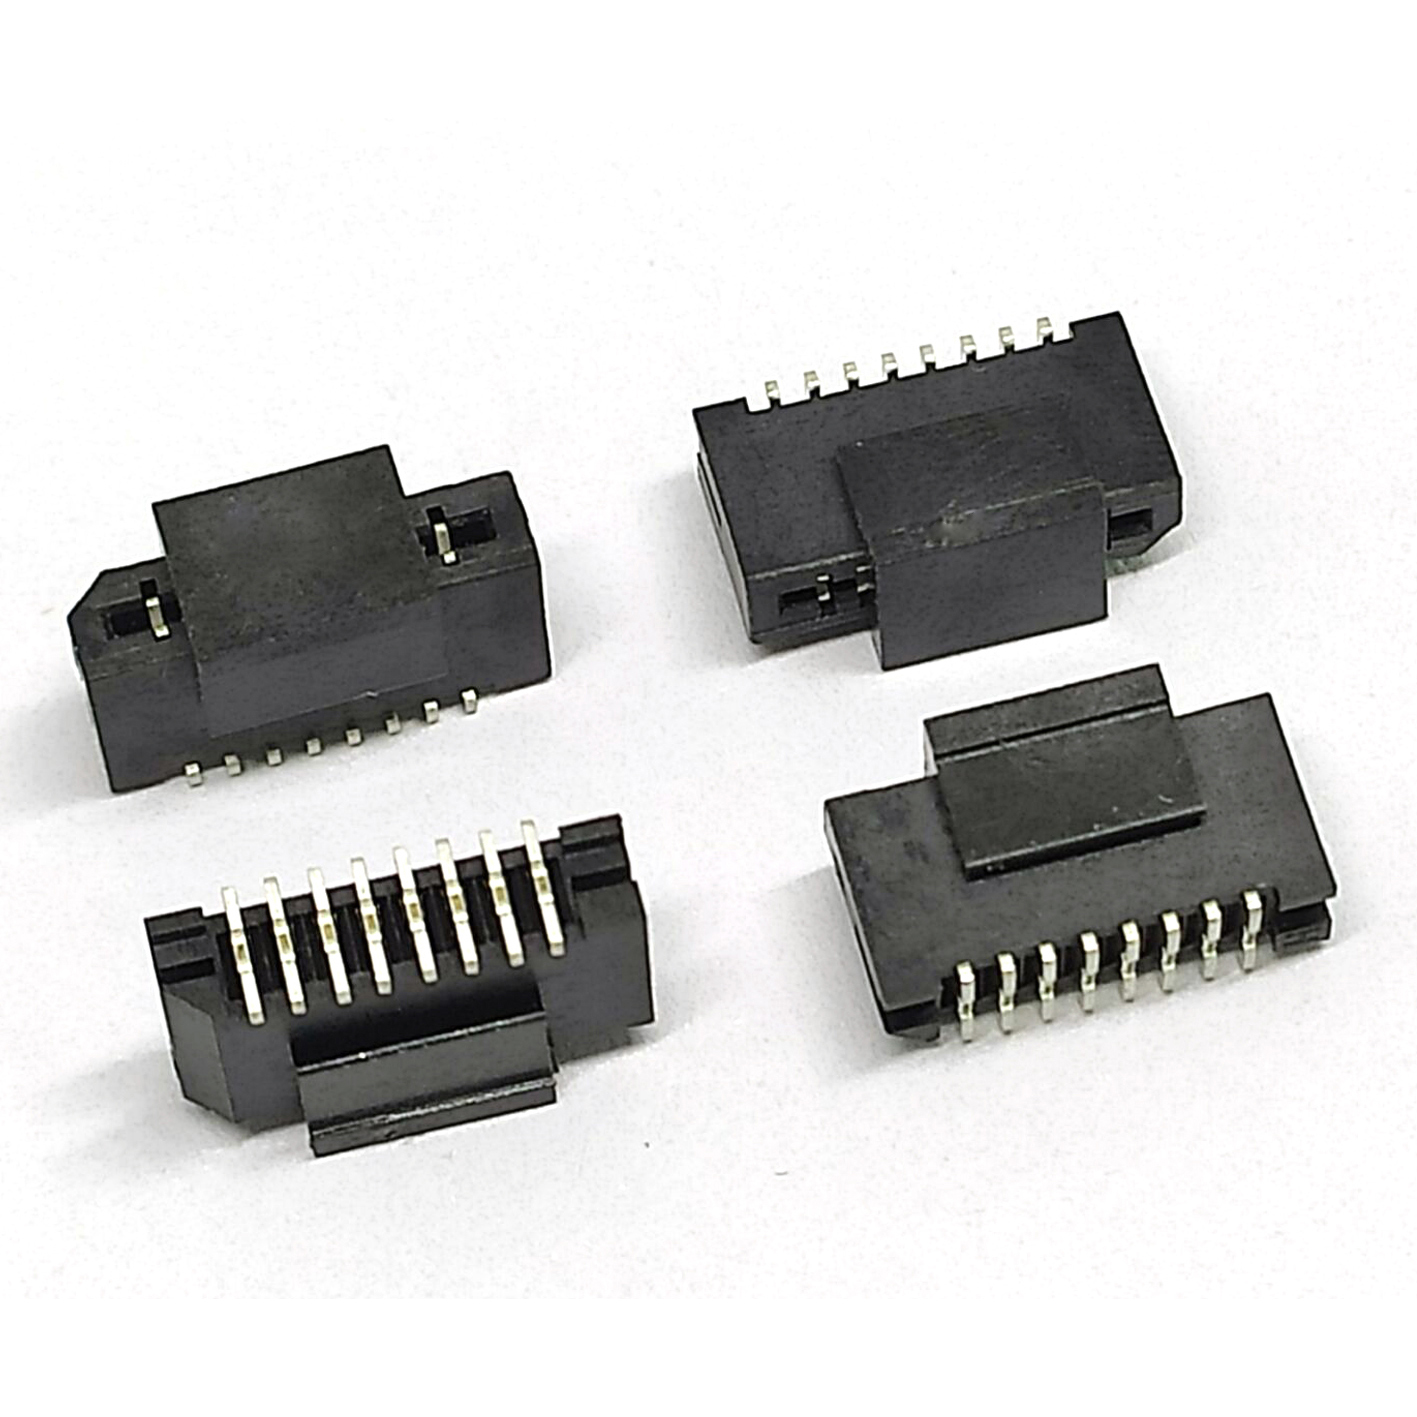 LIF CONNECTOR pitch 1.0mm FPC Non Zif Vertical SMT Type Double Contacts 8Pins